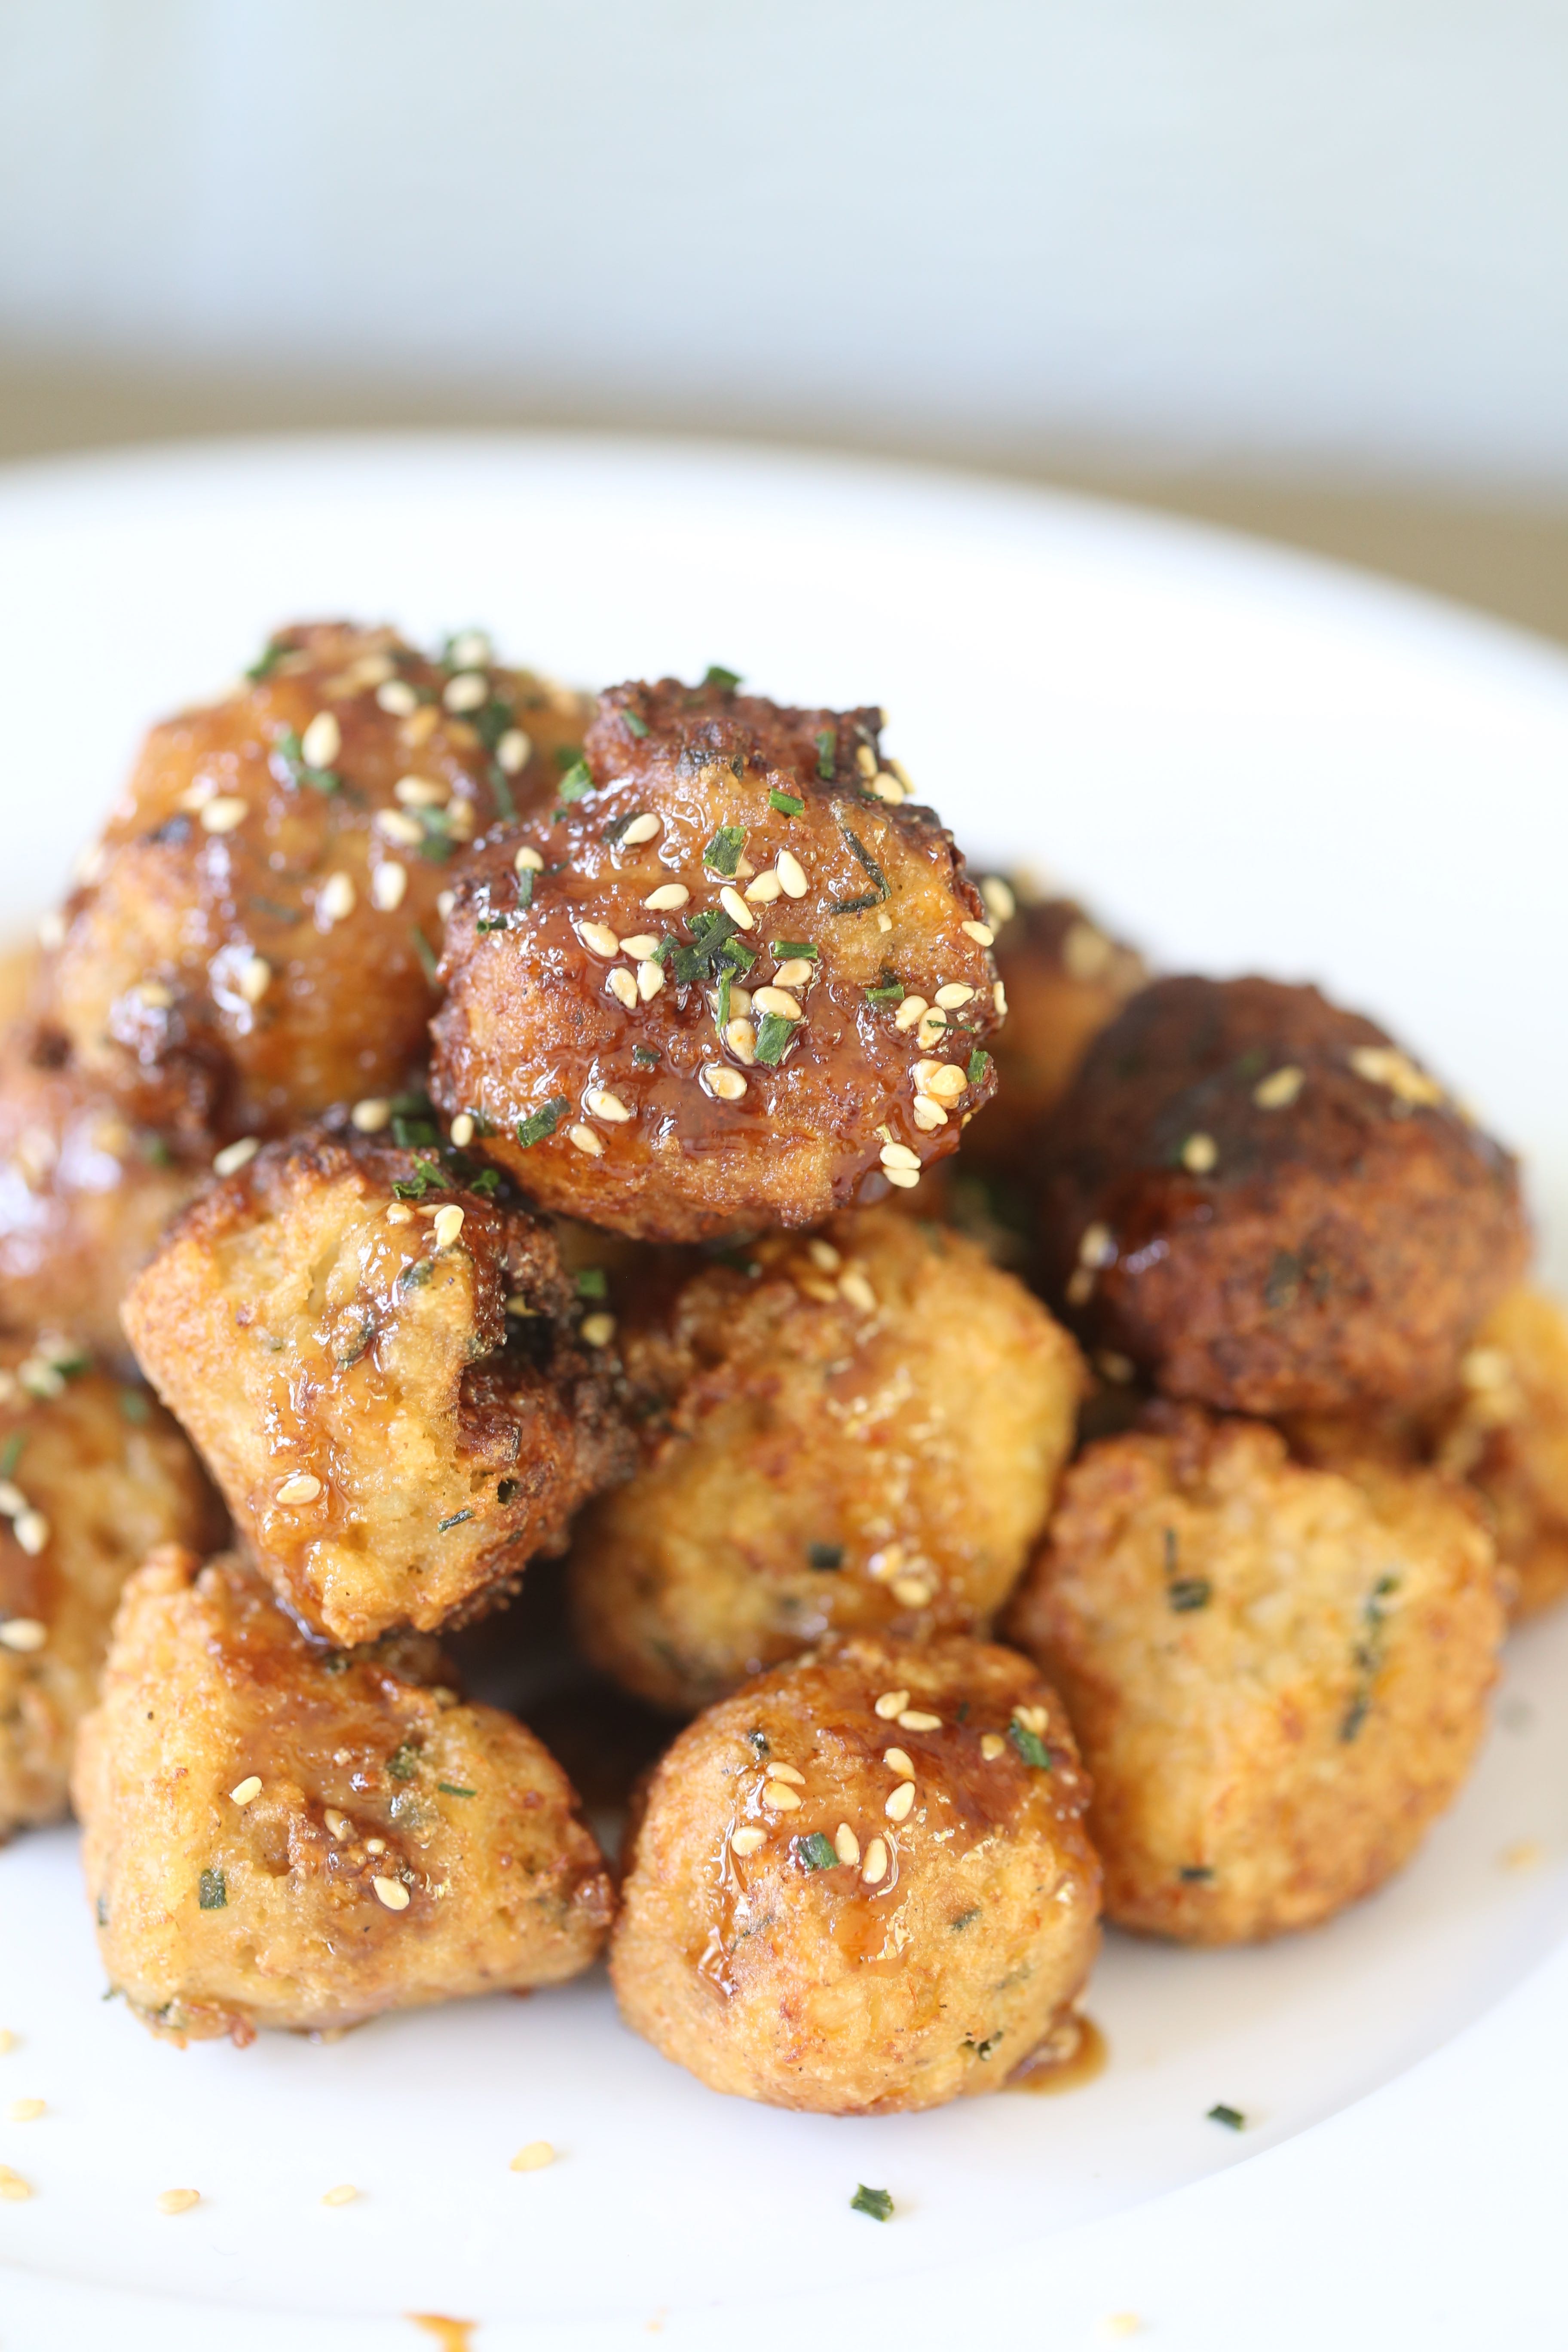 Paleo Caulifritters with General Tso's Glaze